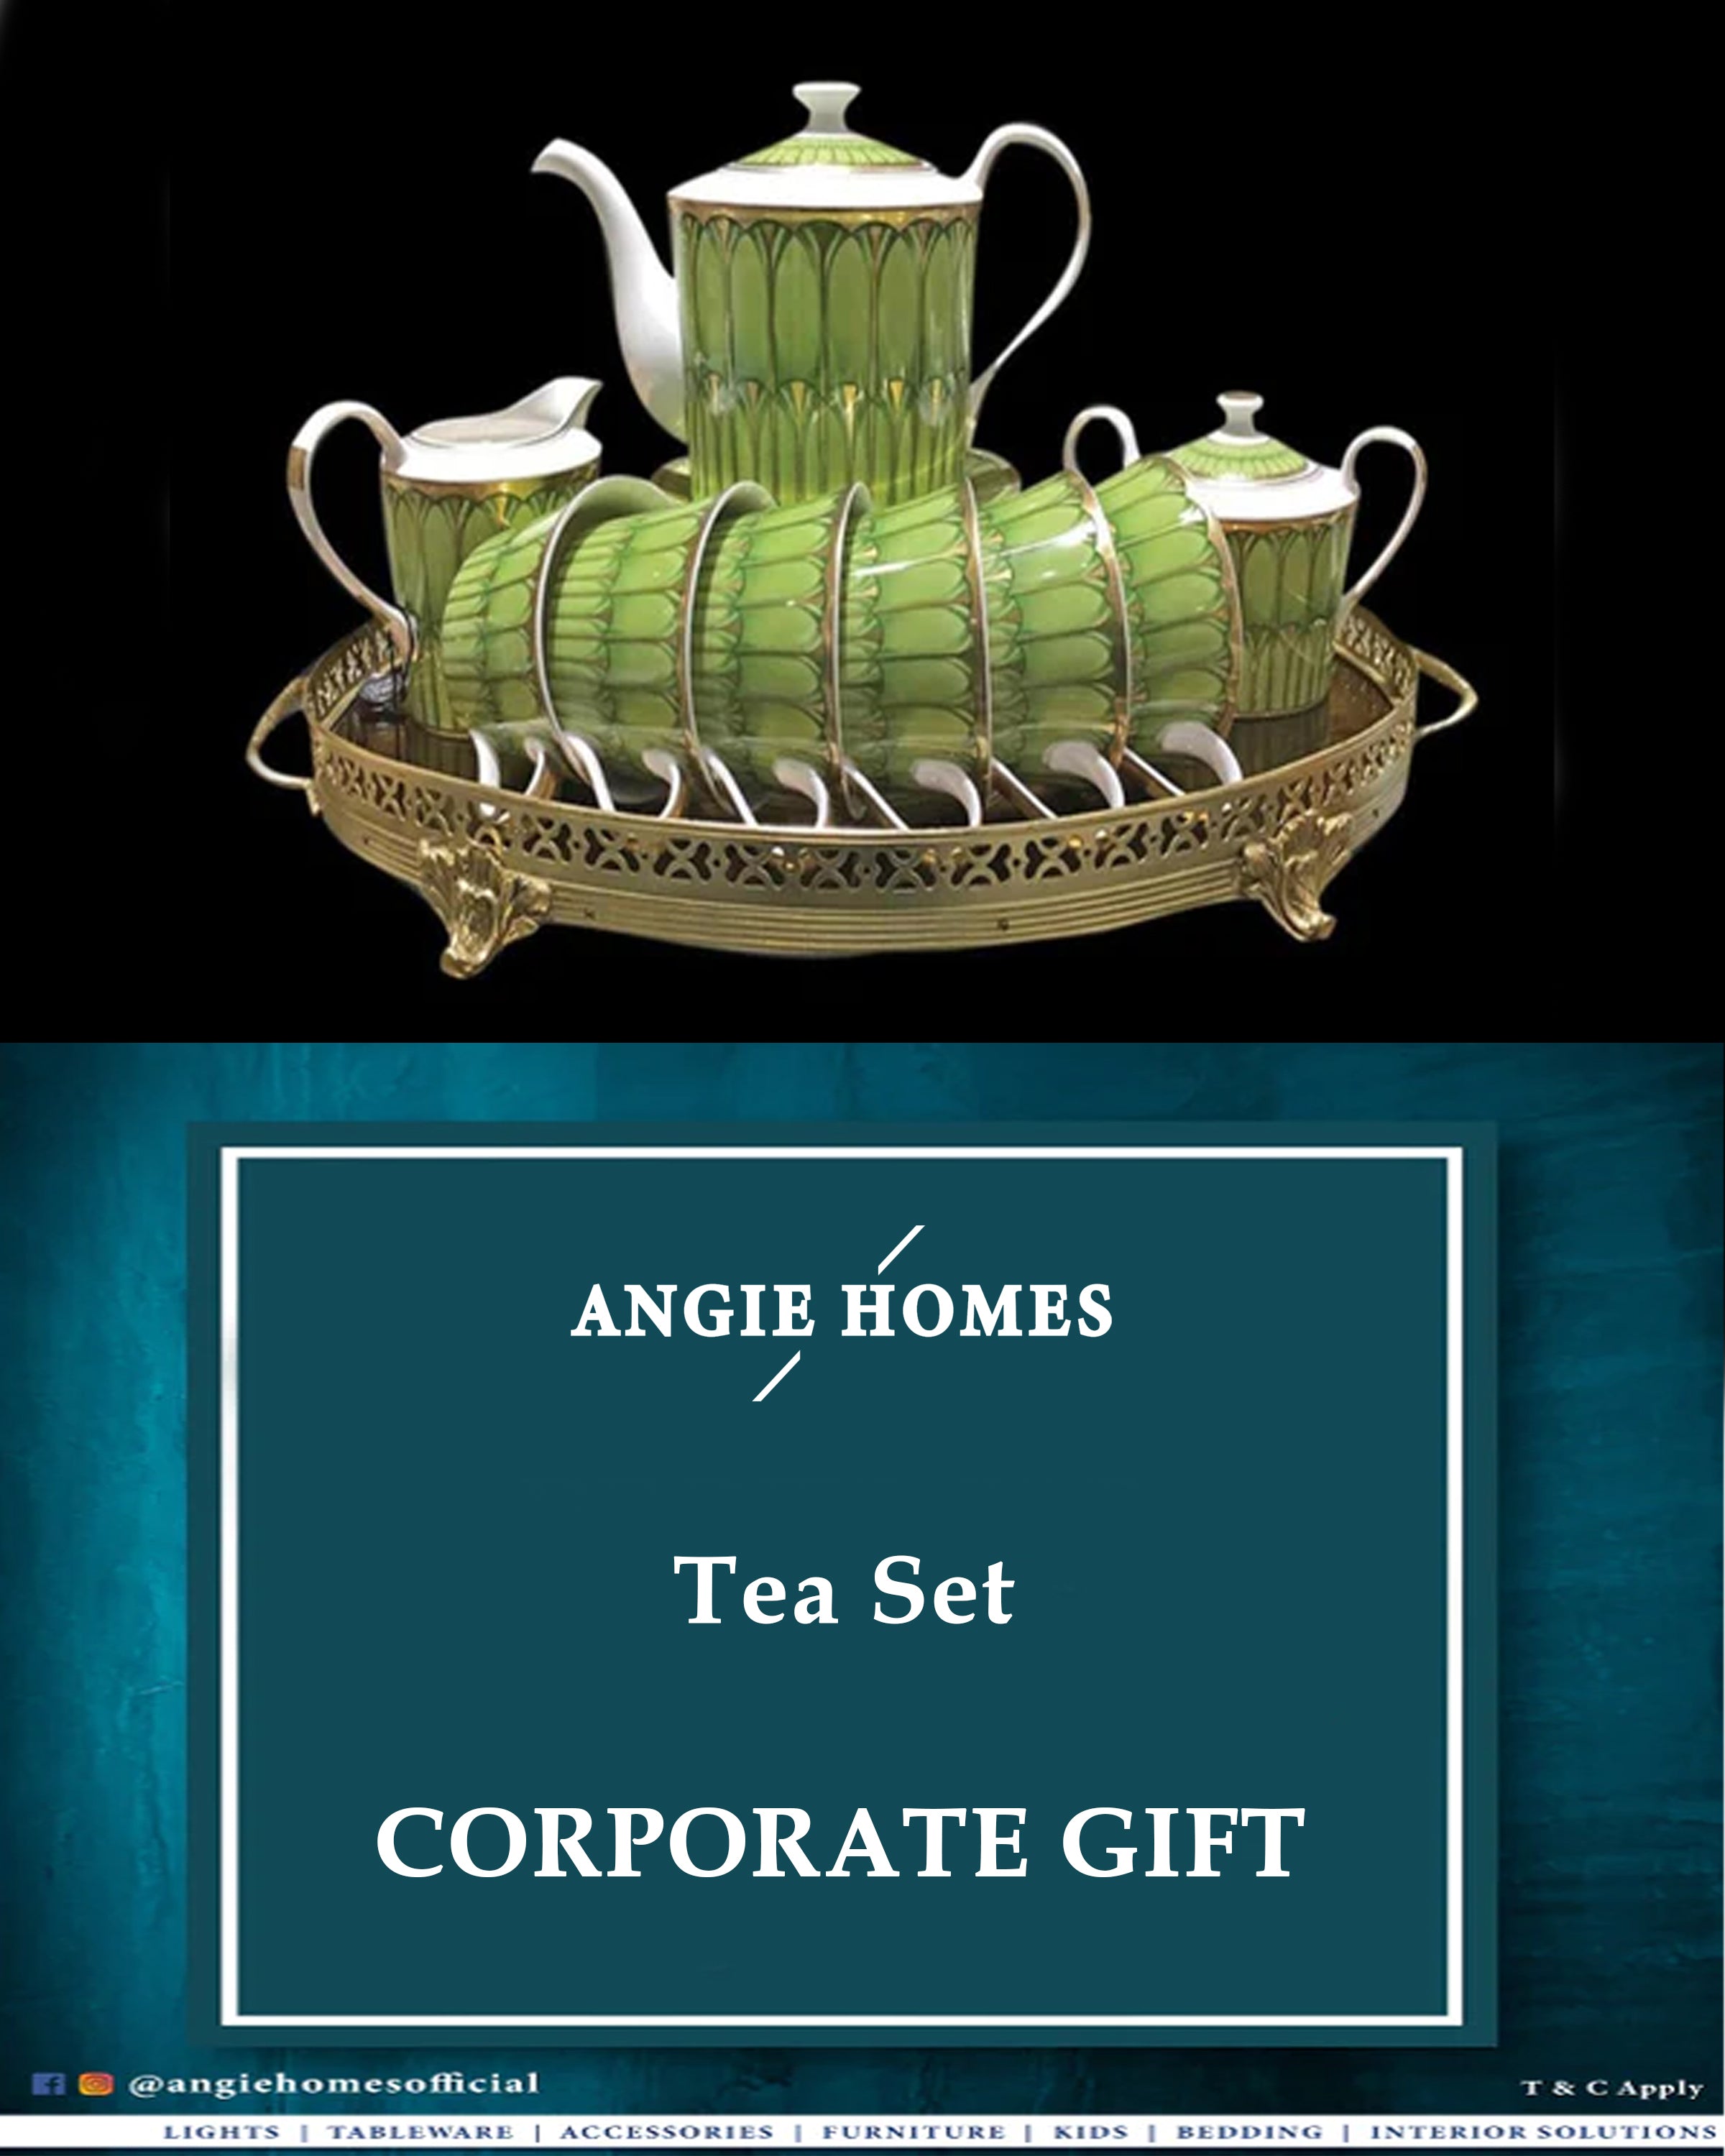 Tea Set for Wedding, House Warming & Corporate Gift ANGIE HOMES